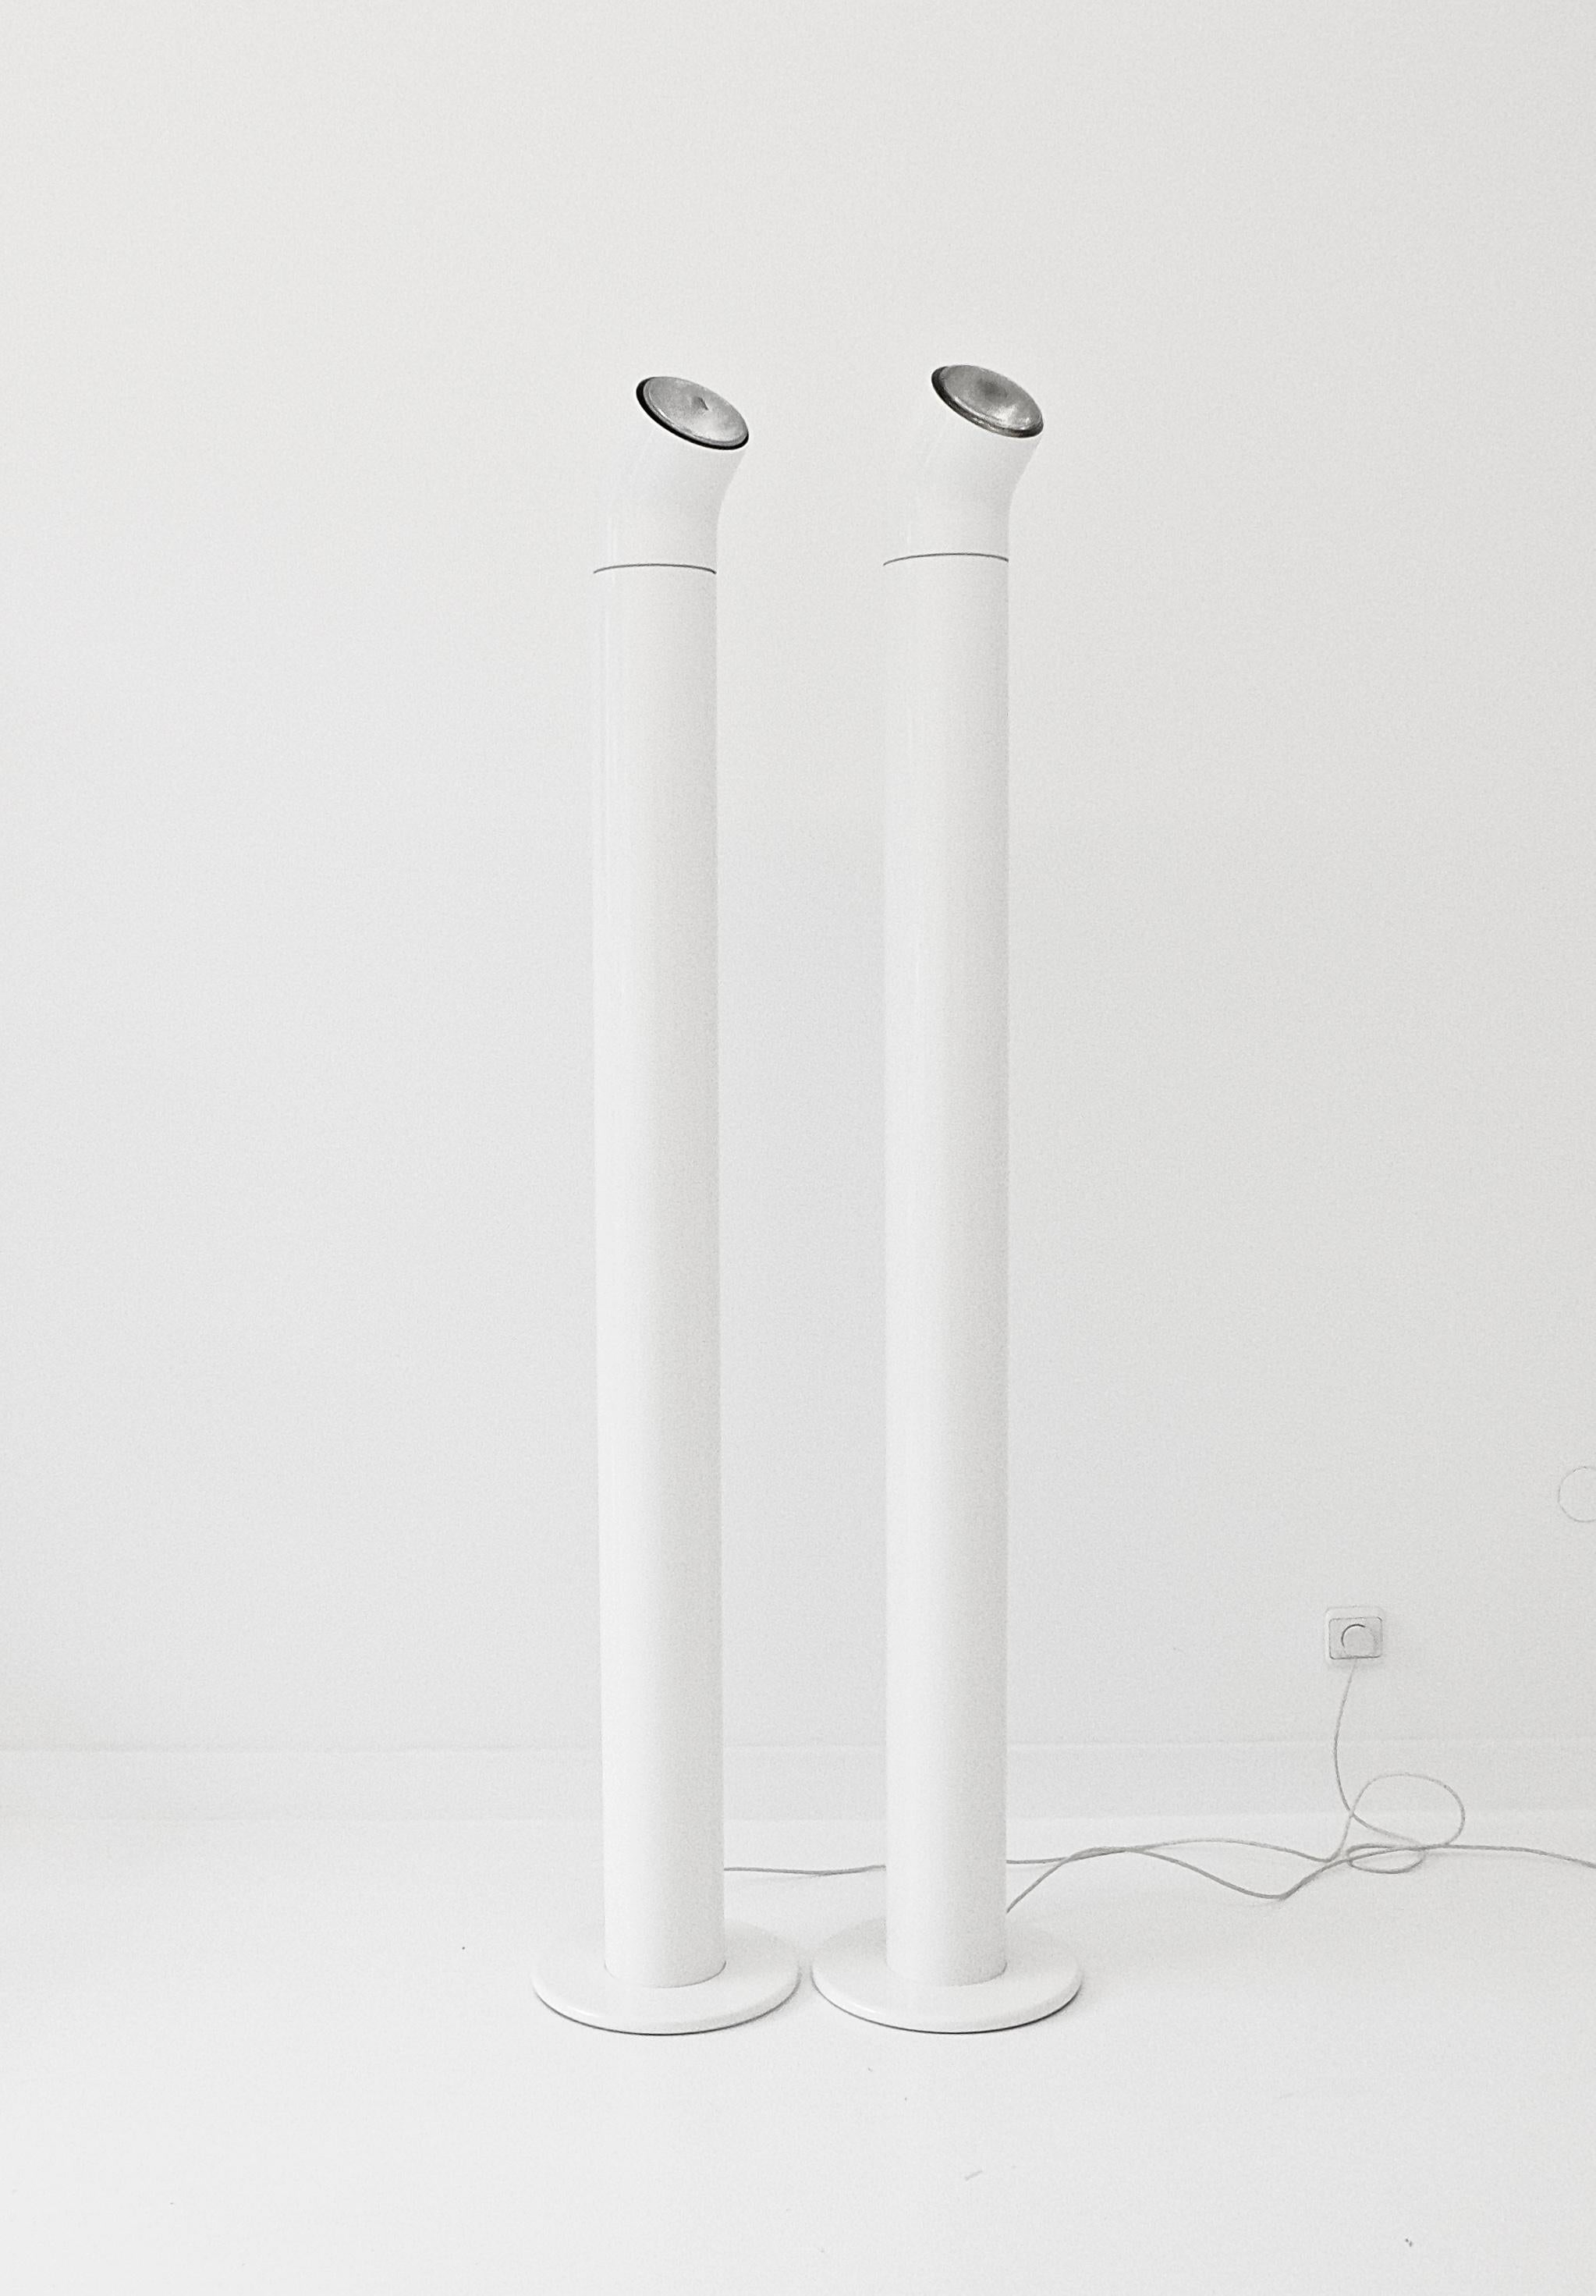 a pair of alain richard a19 floor lamps for disderot, france 1967. the base and the rotating angled part of the lamp are in white lacquered cast aluminium, the middle part is a pvc tube with black light switch at about shoulder height. very good